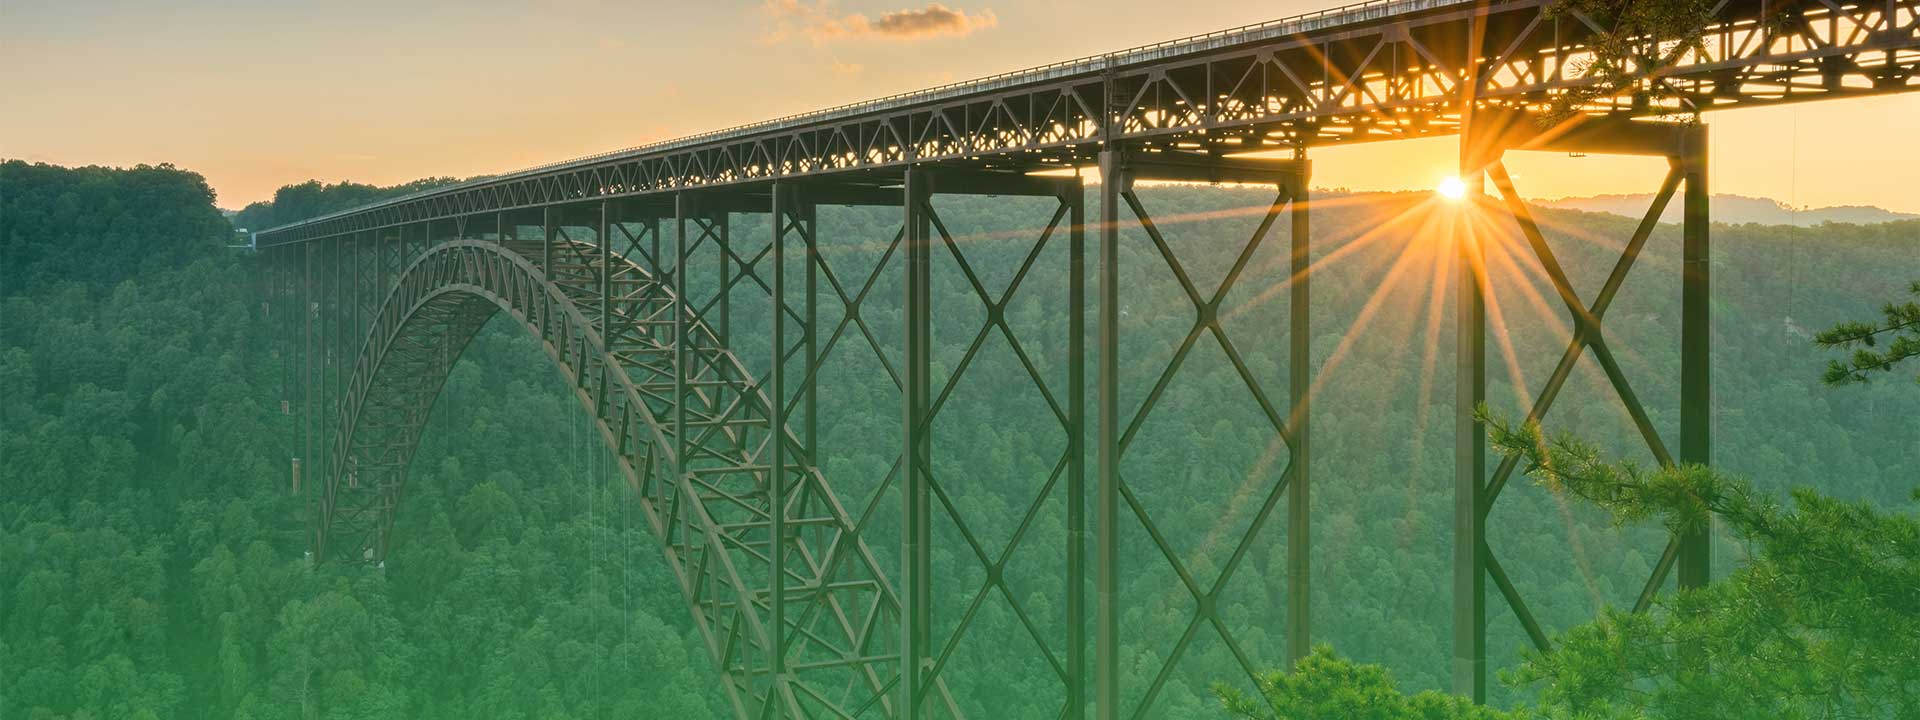 View of New River Gorge Bridge in Fayetteville, West Virginia